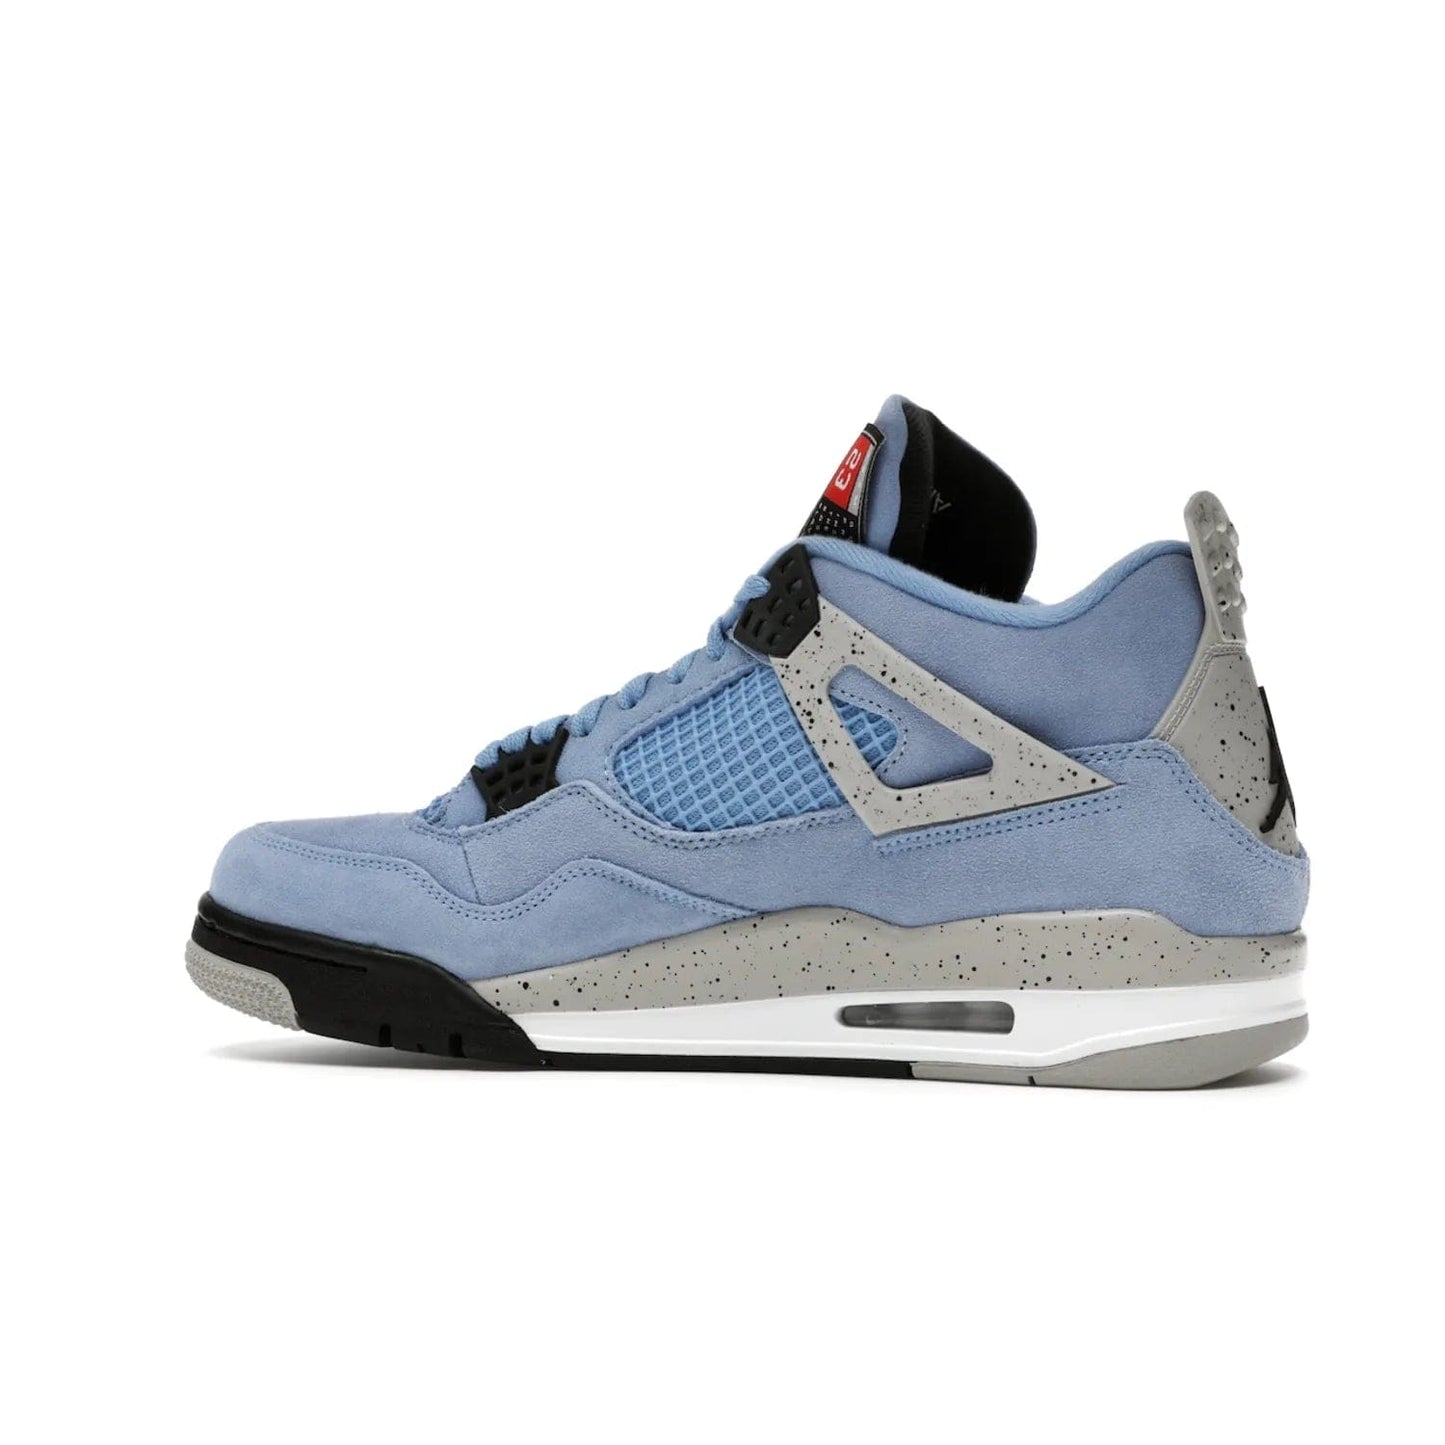 Jordan 4 Retro University Blue - Image 21 - Only at www.BallersClubKickz.com - The Air Jordan 4 University Blue honors MJ's alma mater. Rich University Blue suede, panels of netting, and Cement Grey speckled eyelets give this design an edgy look. Features a black, white and Tech Grey sole with a clear Air unit and two woven labels on the tongue. Jumpman logo & Team Jordan jock tag included. Released April 2021.